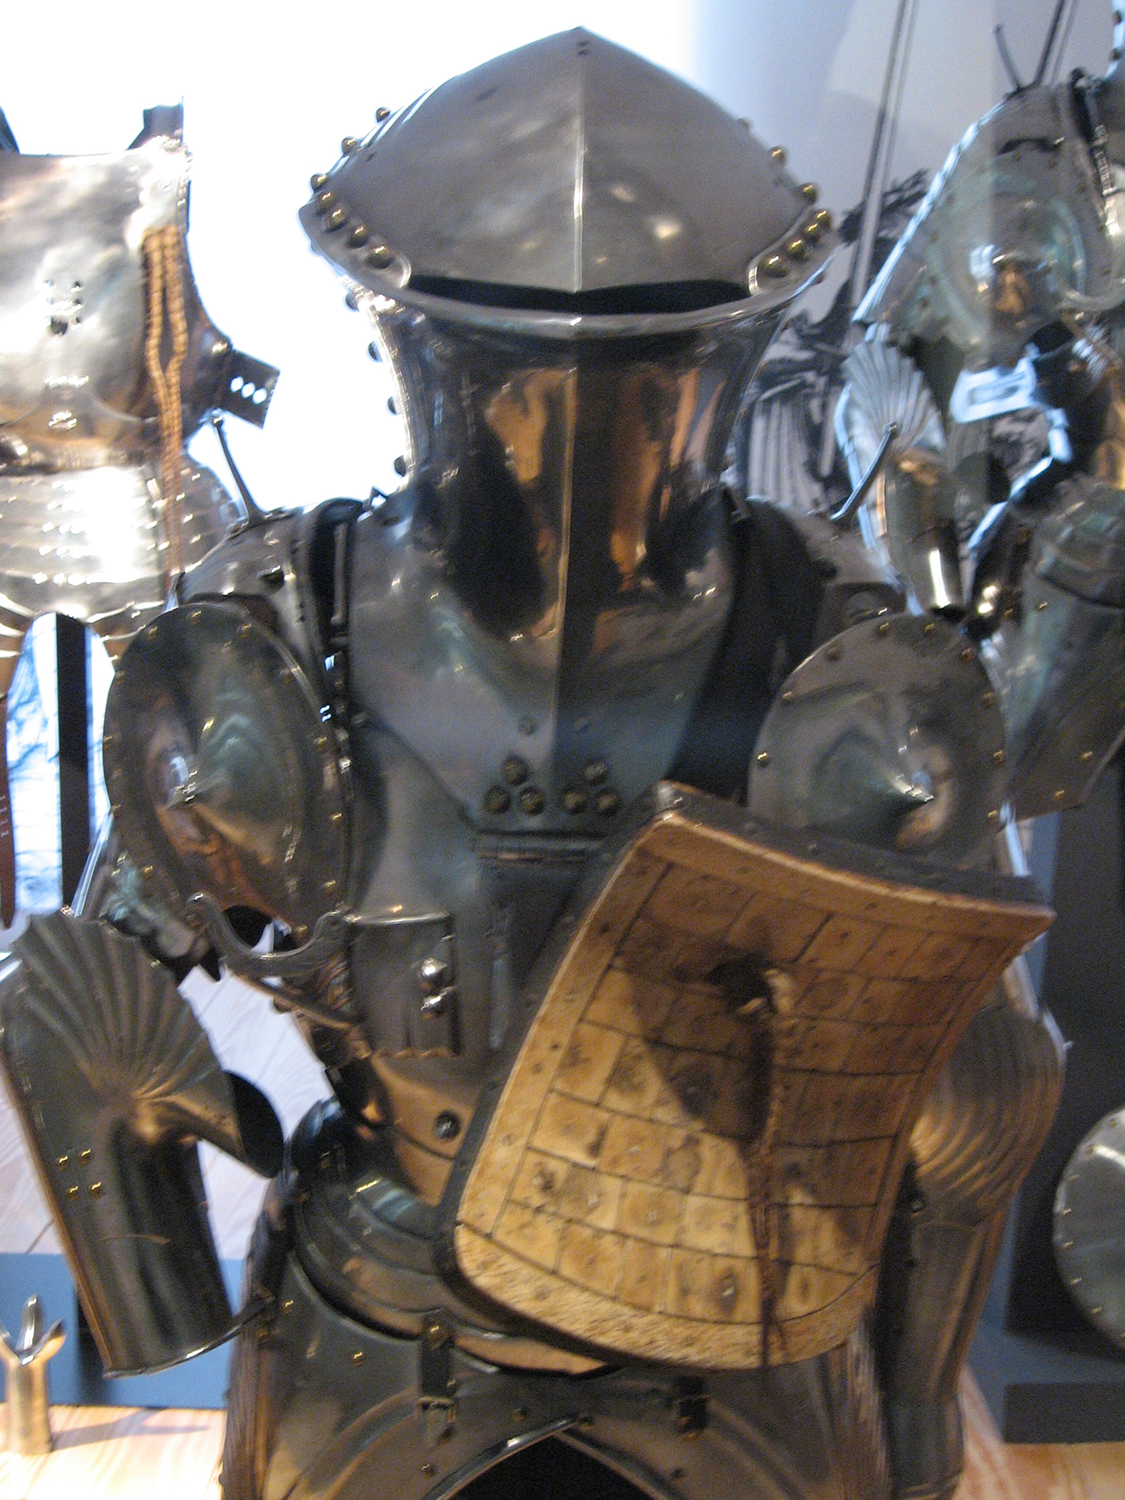 Late medieval jousting armour? Yeas please.